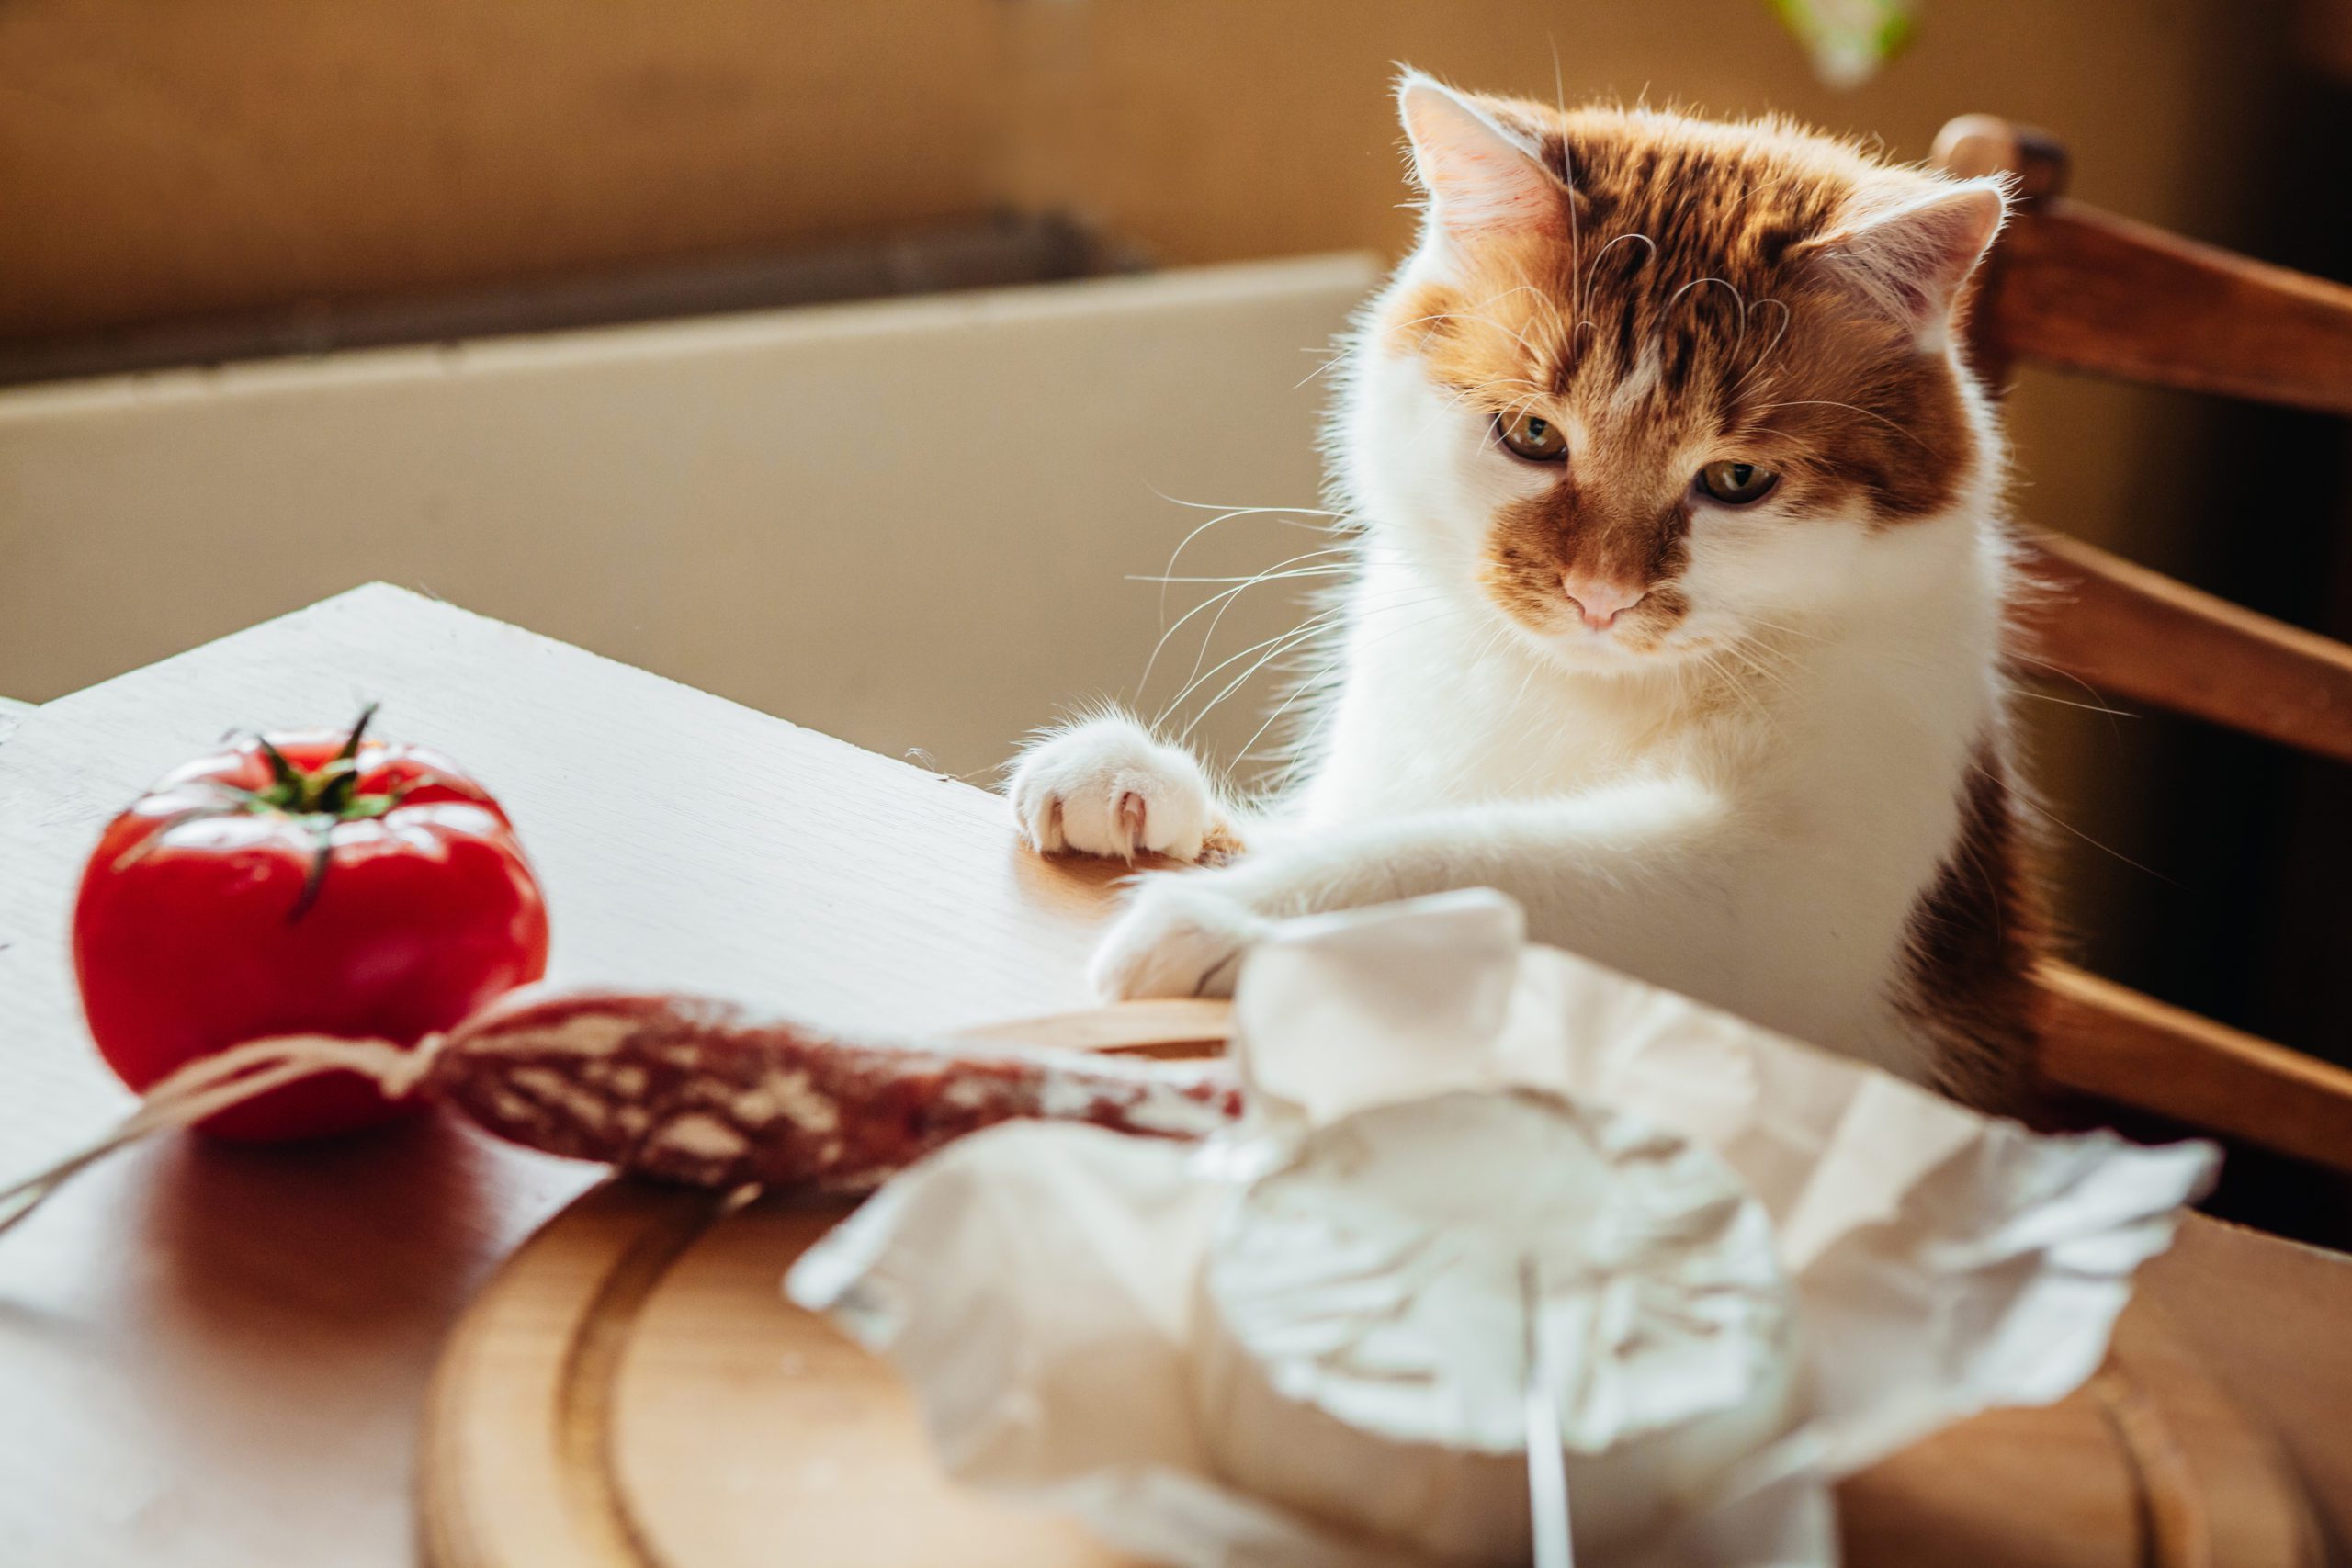 The Cat Helps To Cook A Delicious Dinner With Cheese, Salami And